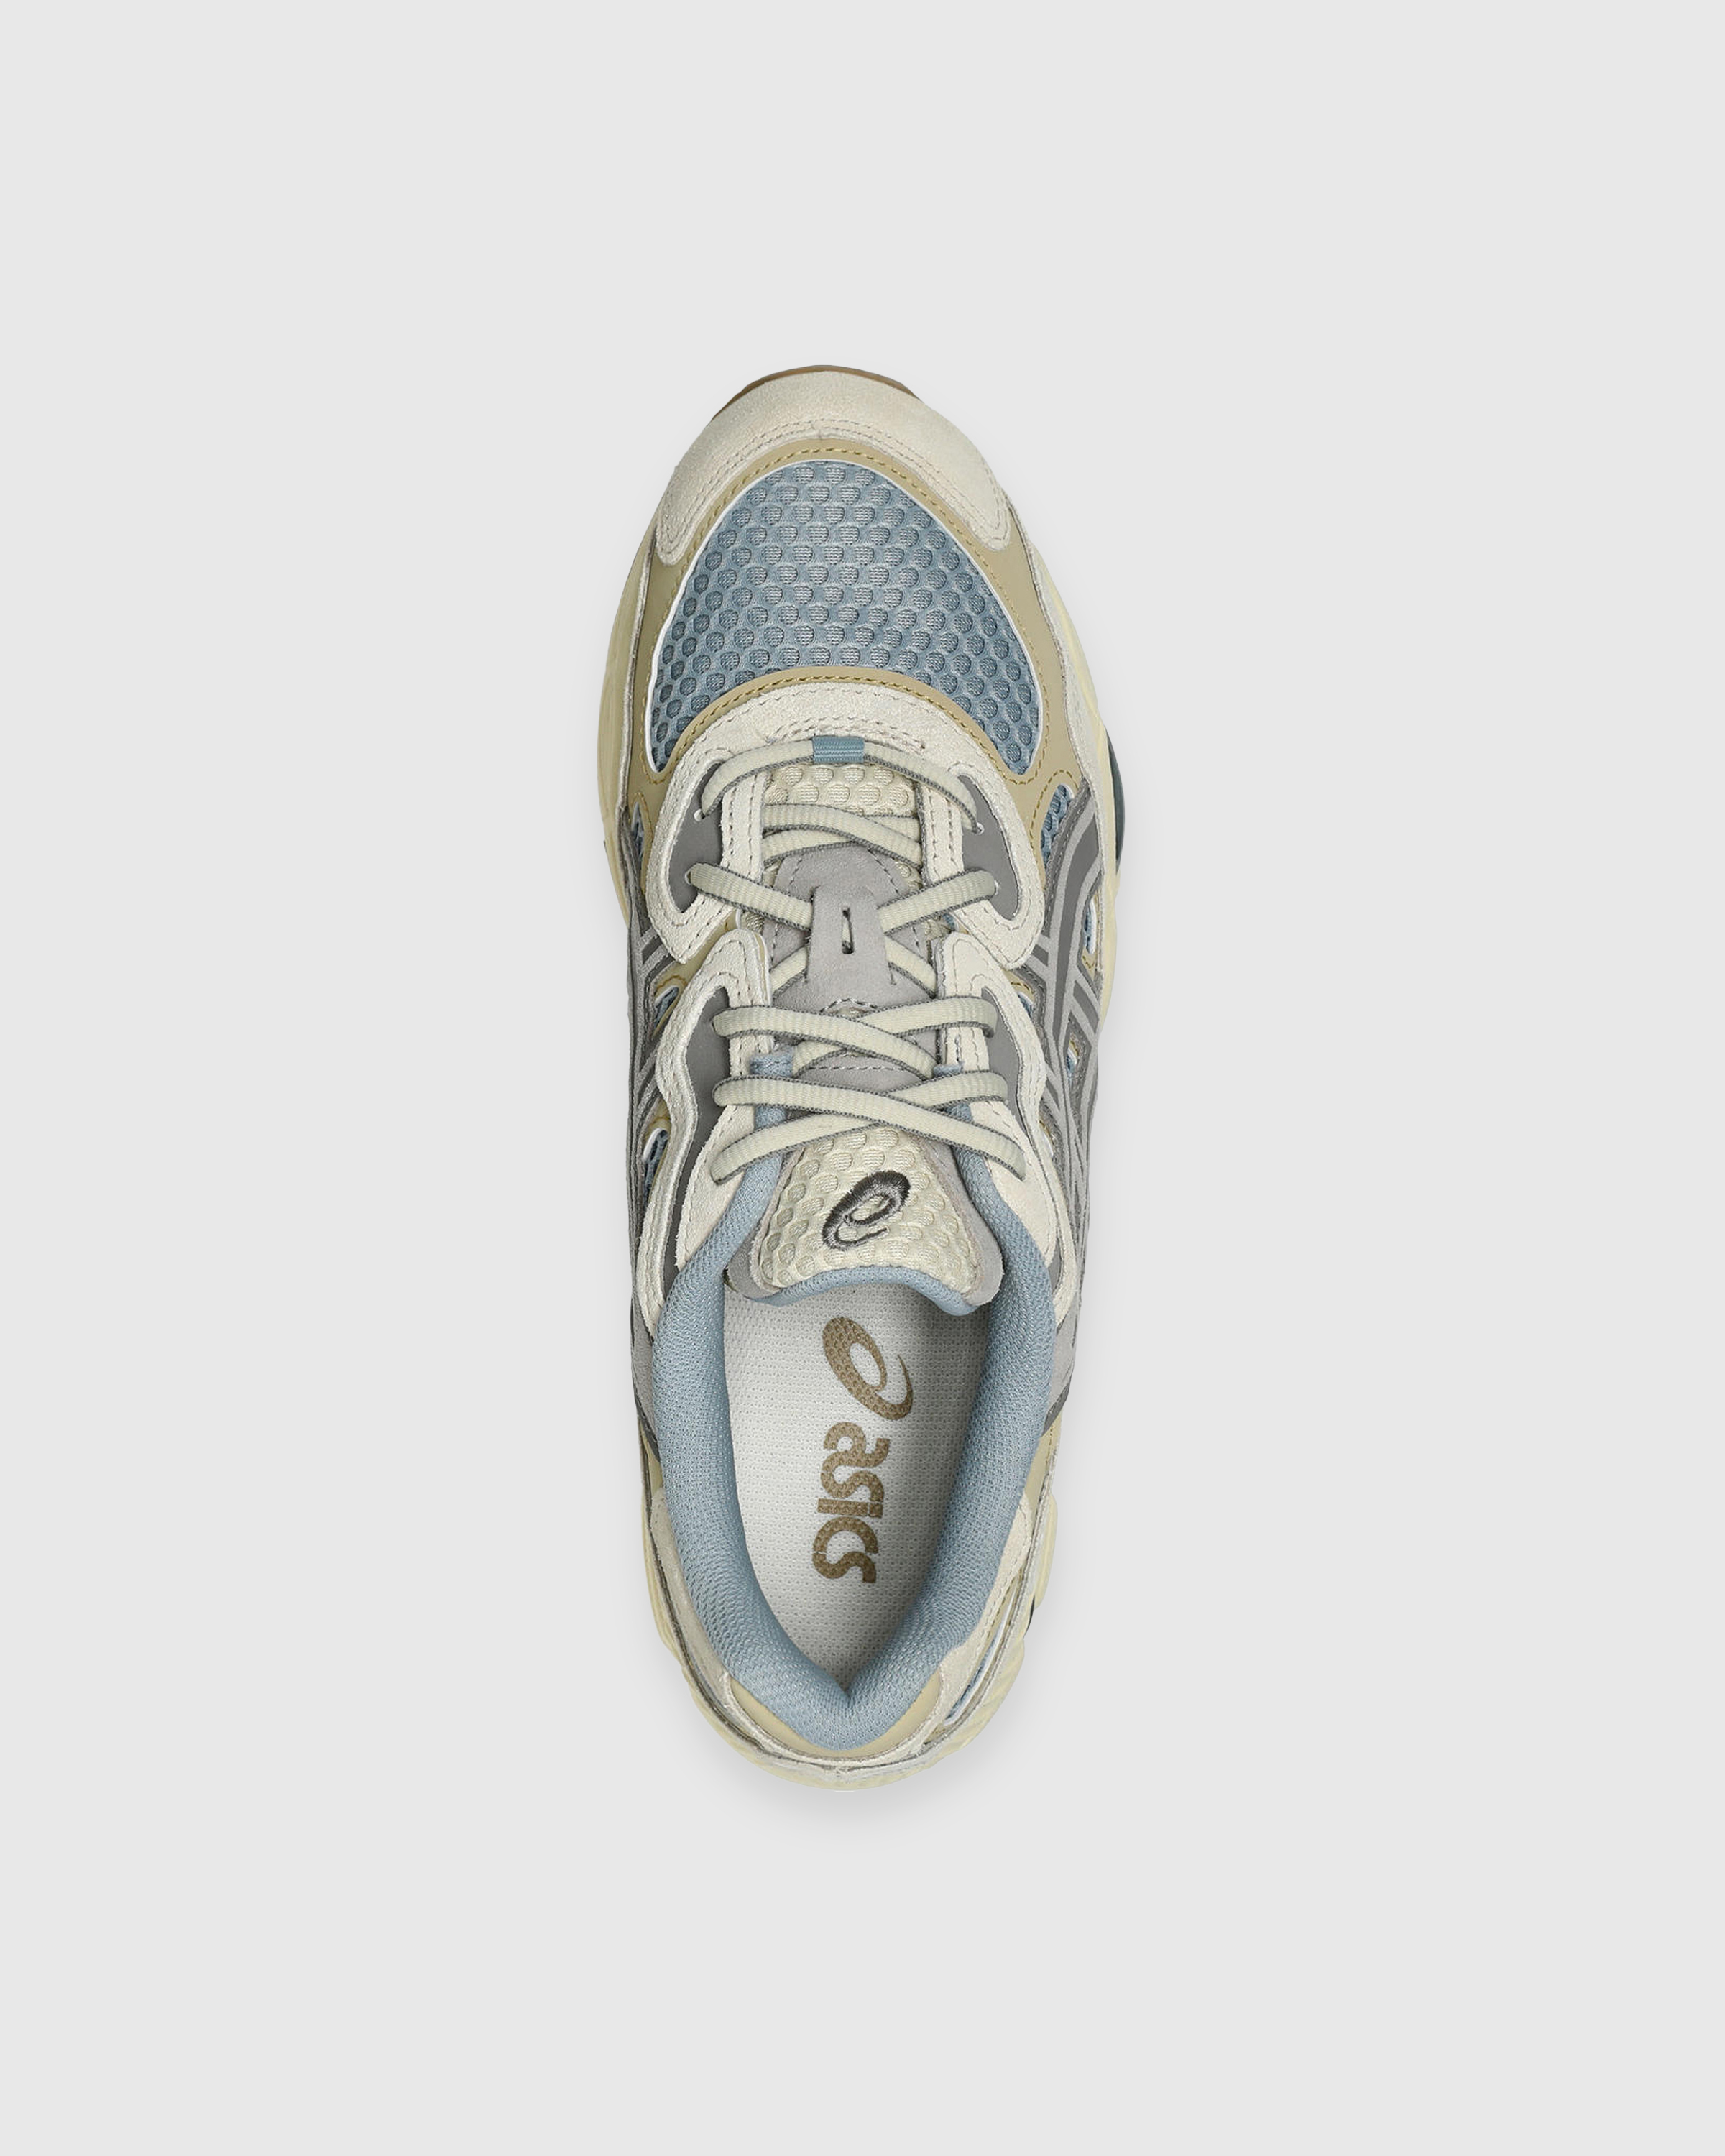 asics – GEL-NYC Dolphin Grey/Oyster Grey - Low Top Sneakers - Grey - Image 6